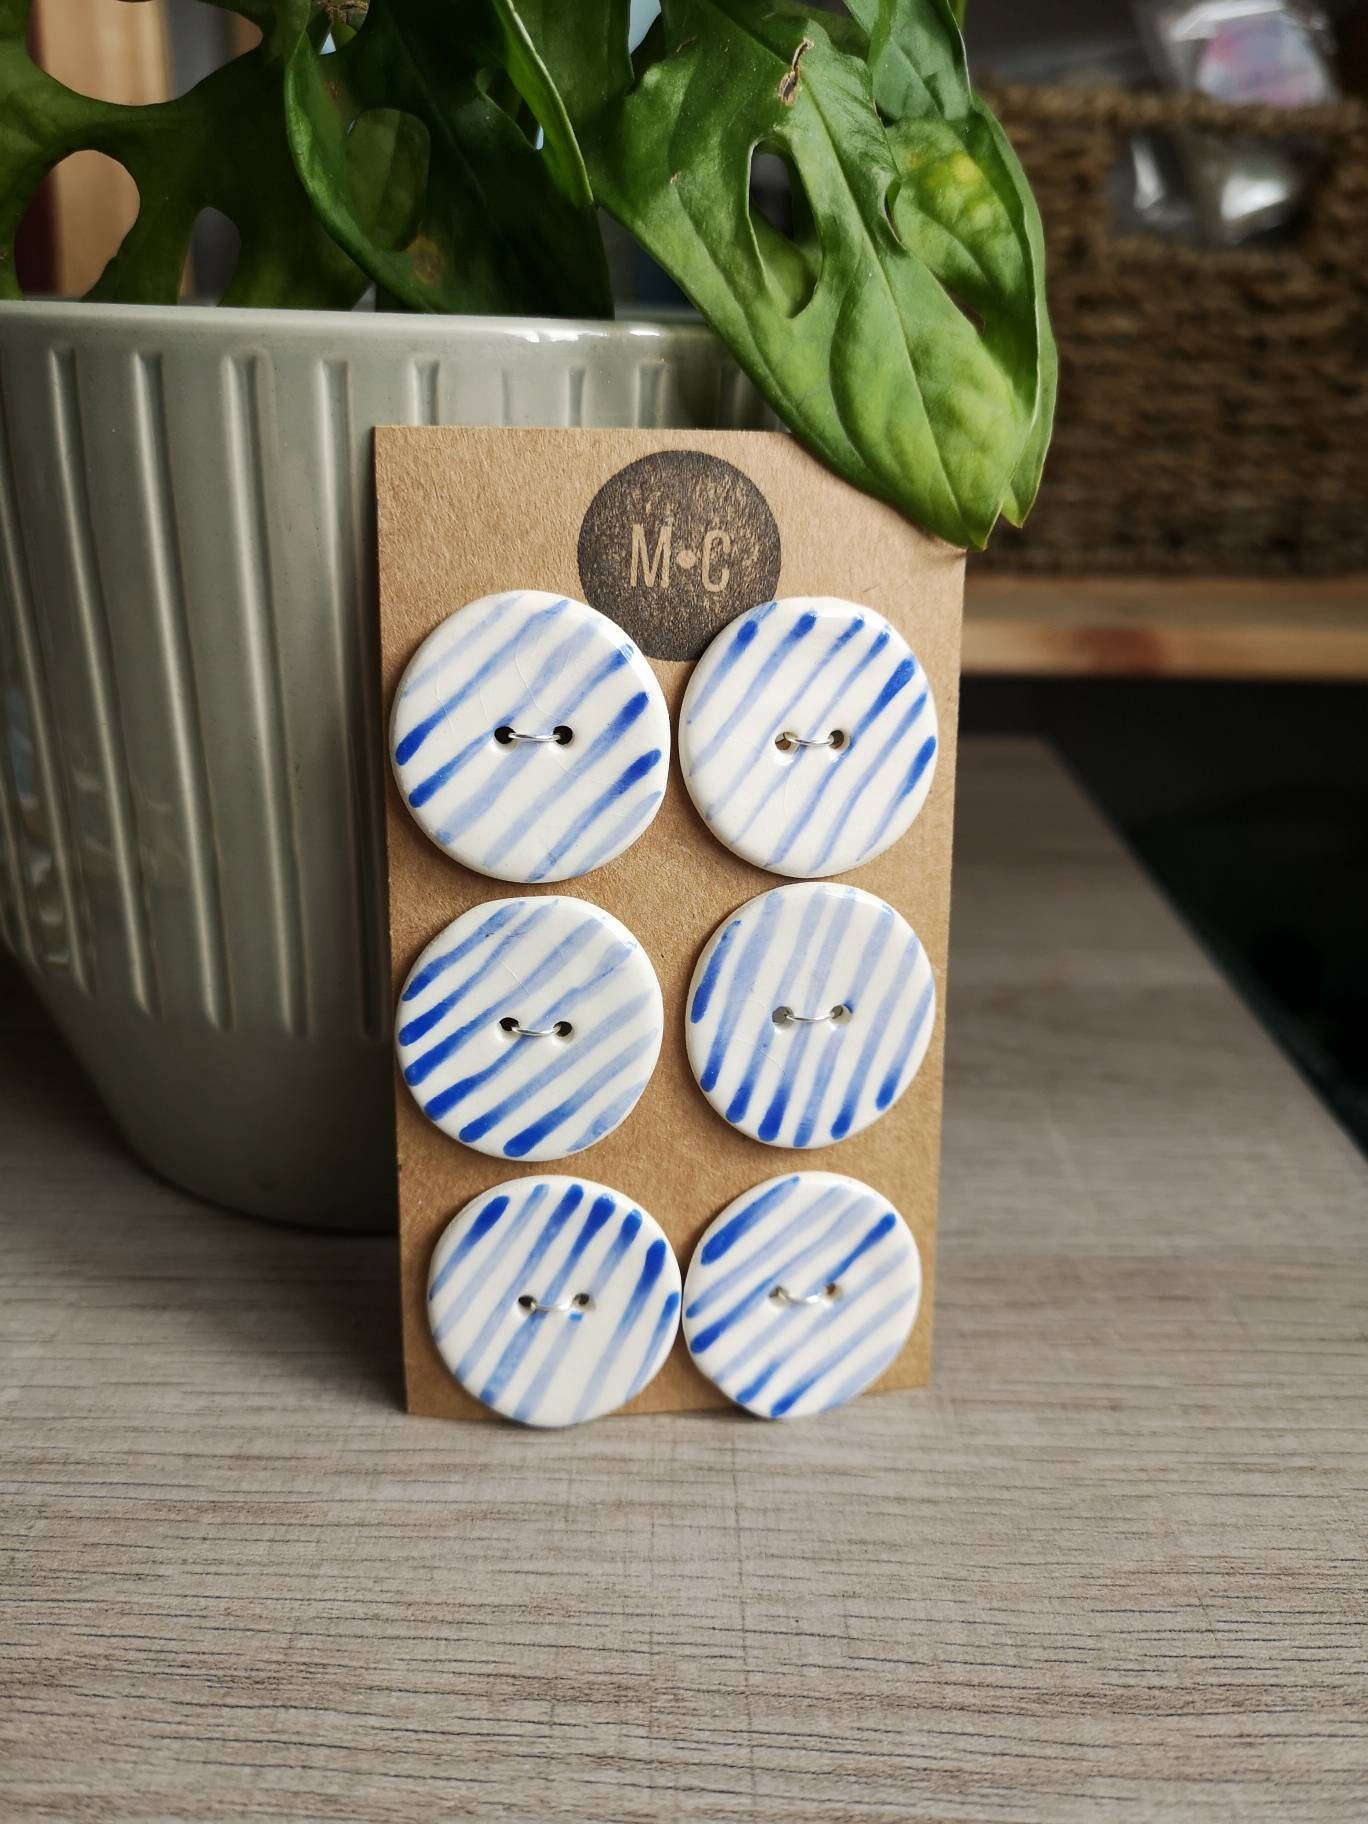 Sewing Buttons, Set of 5 40mm Novelty Buttons for Crafts, Best Sellers  Custom Buttons, Handmade Ceramics Sewing Notions 